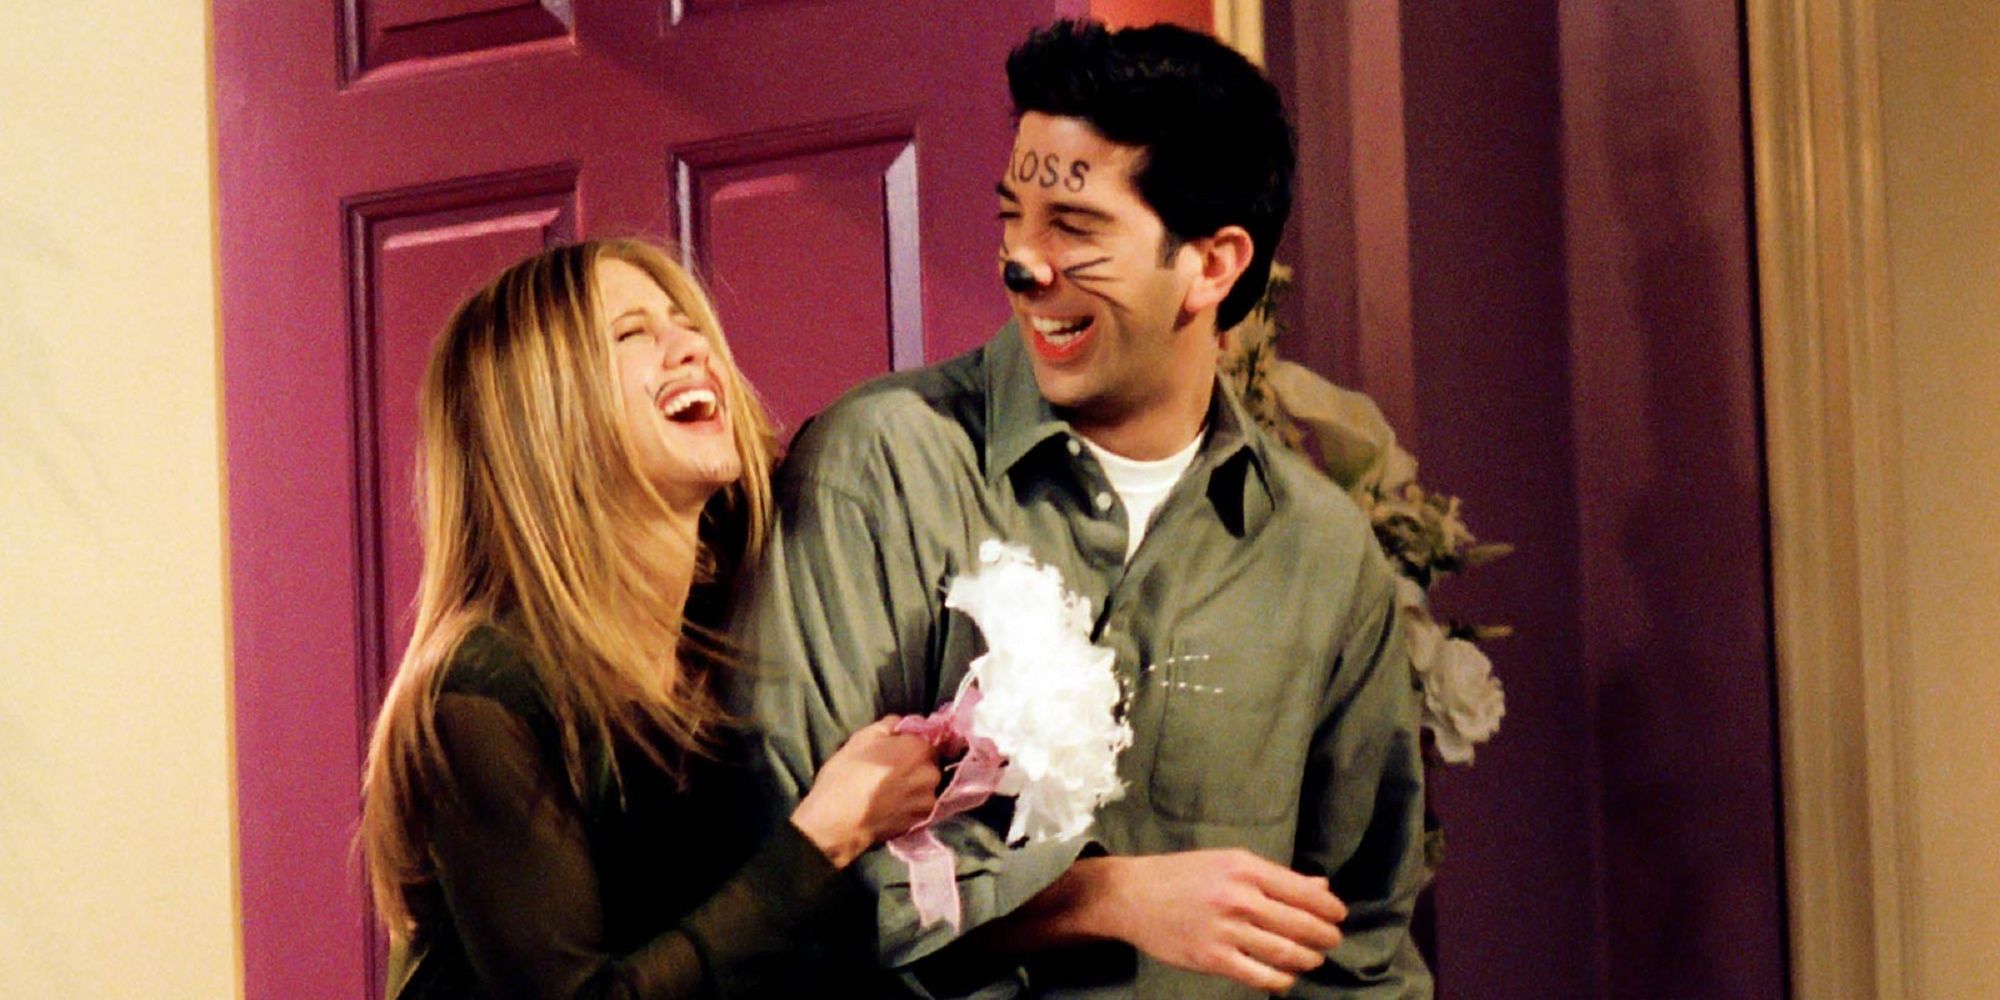 Ross and Rachel after getting married in Vegas